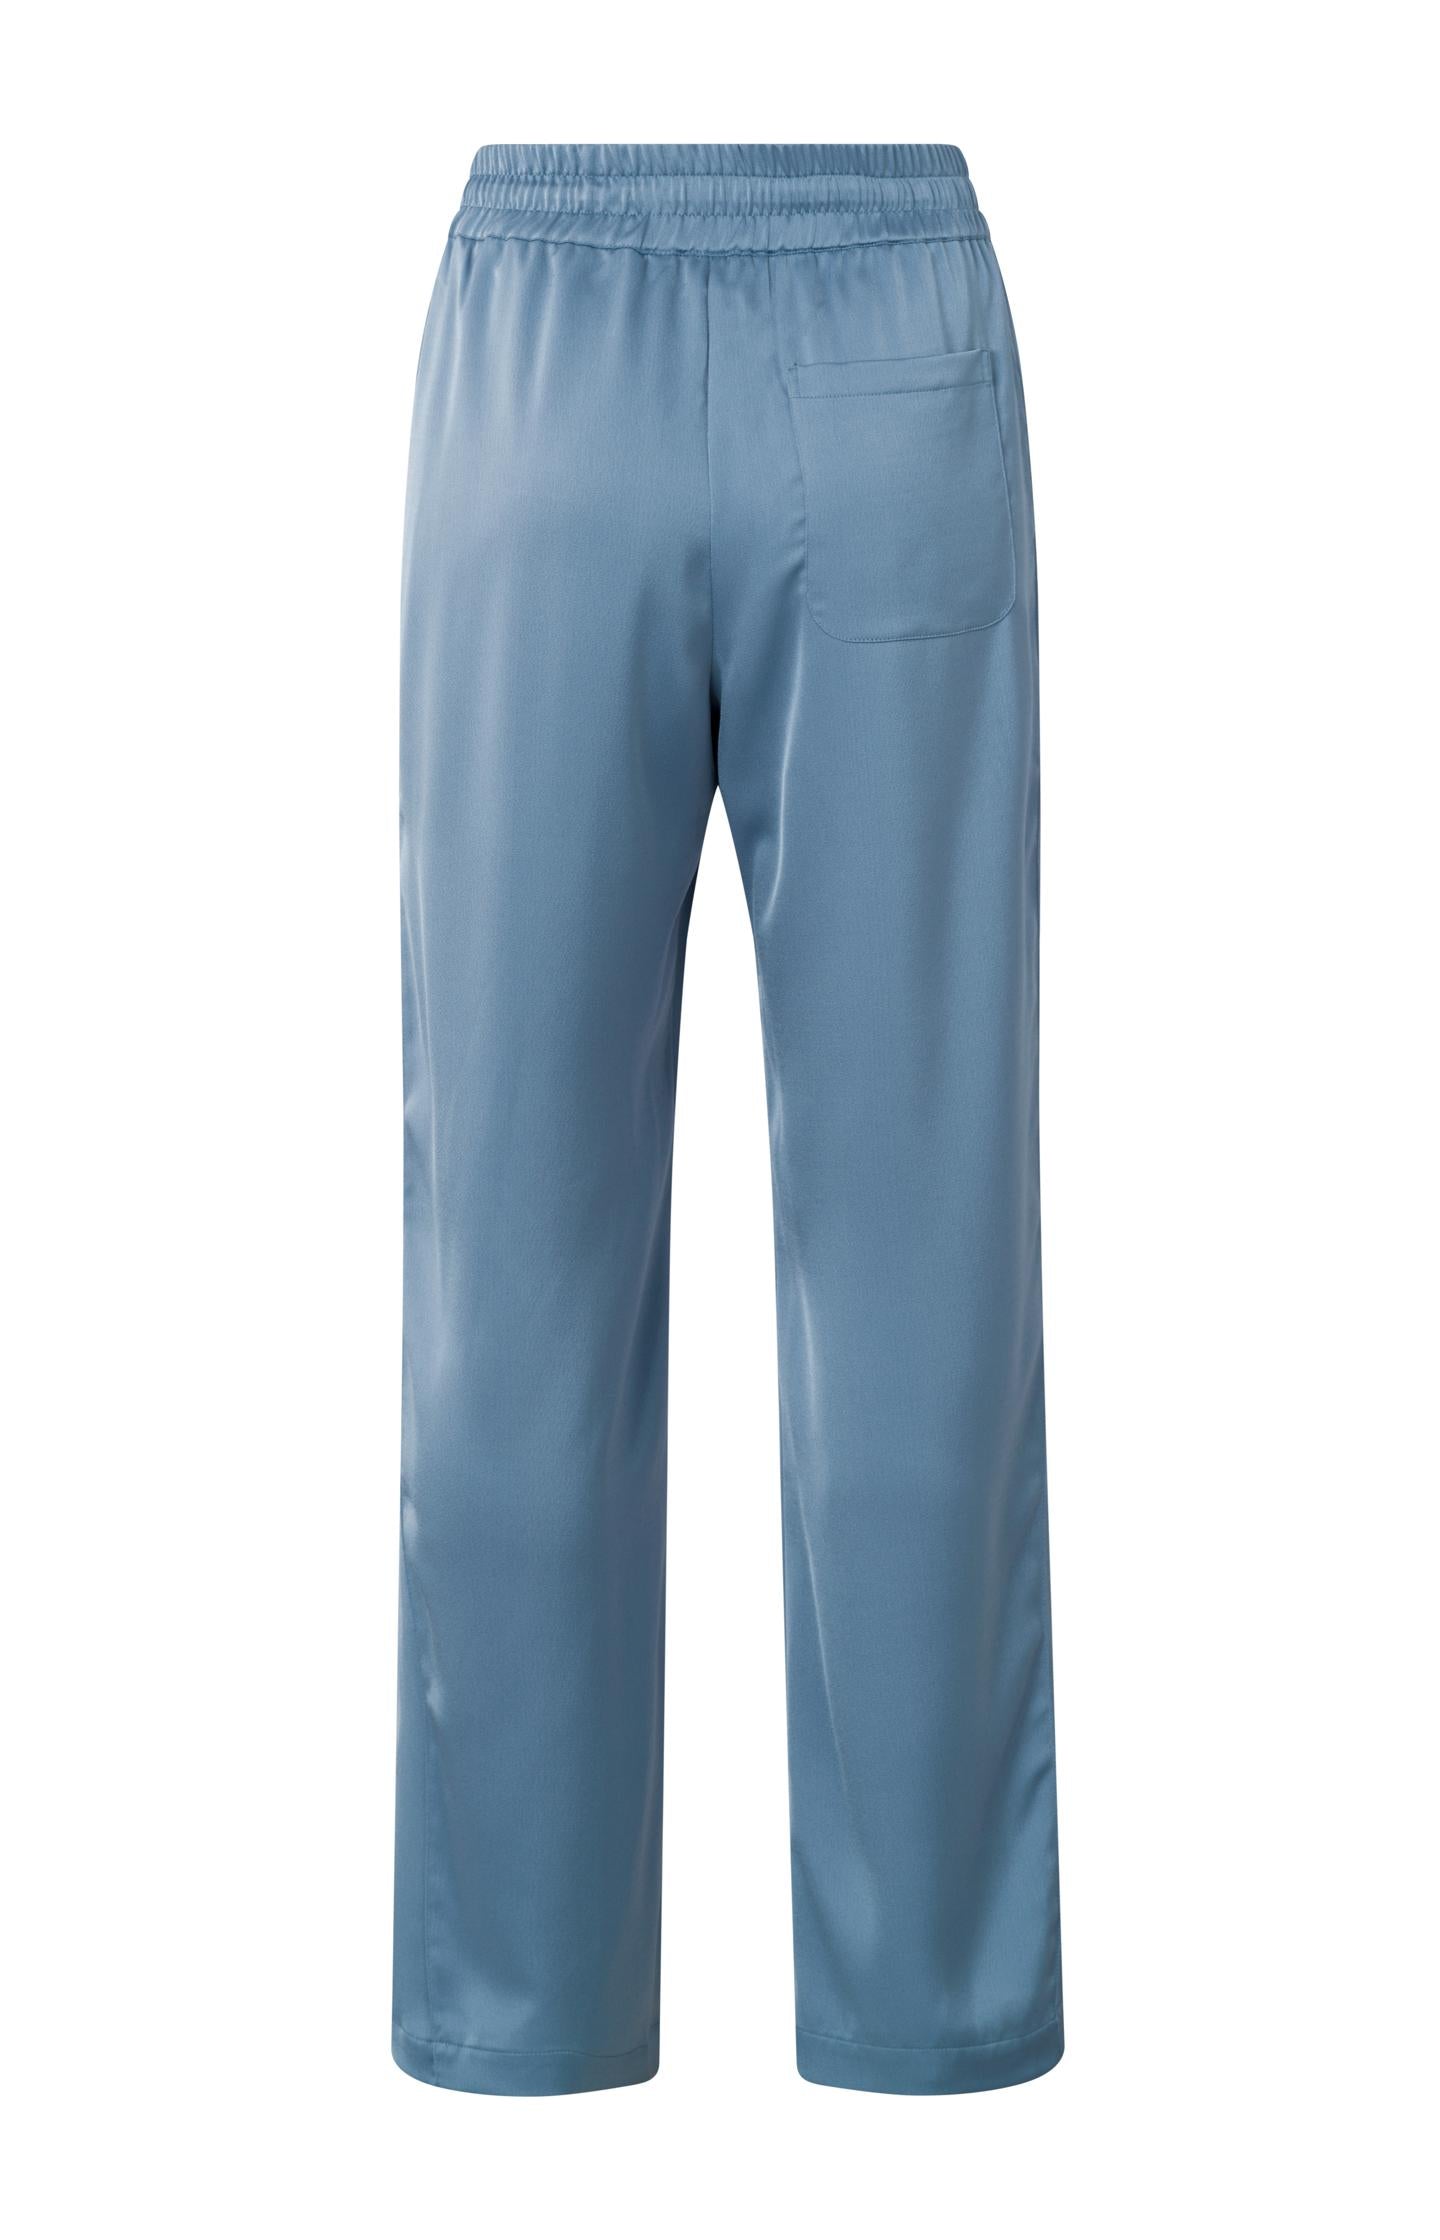 Blue Satin Trousers 01-301121-404